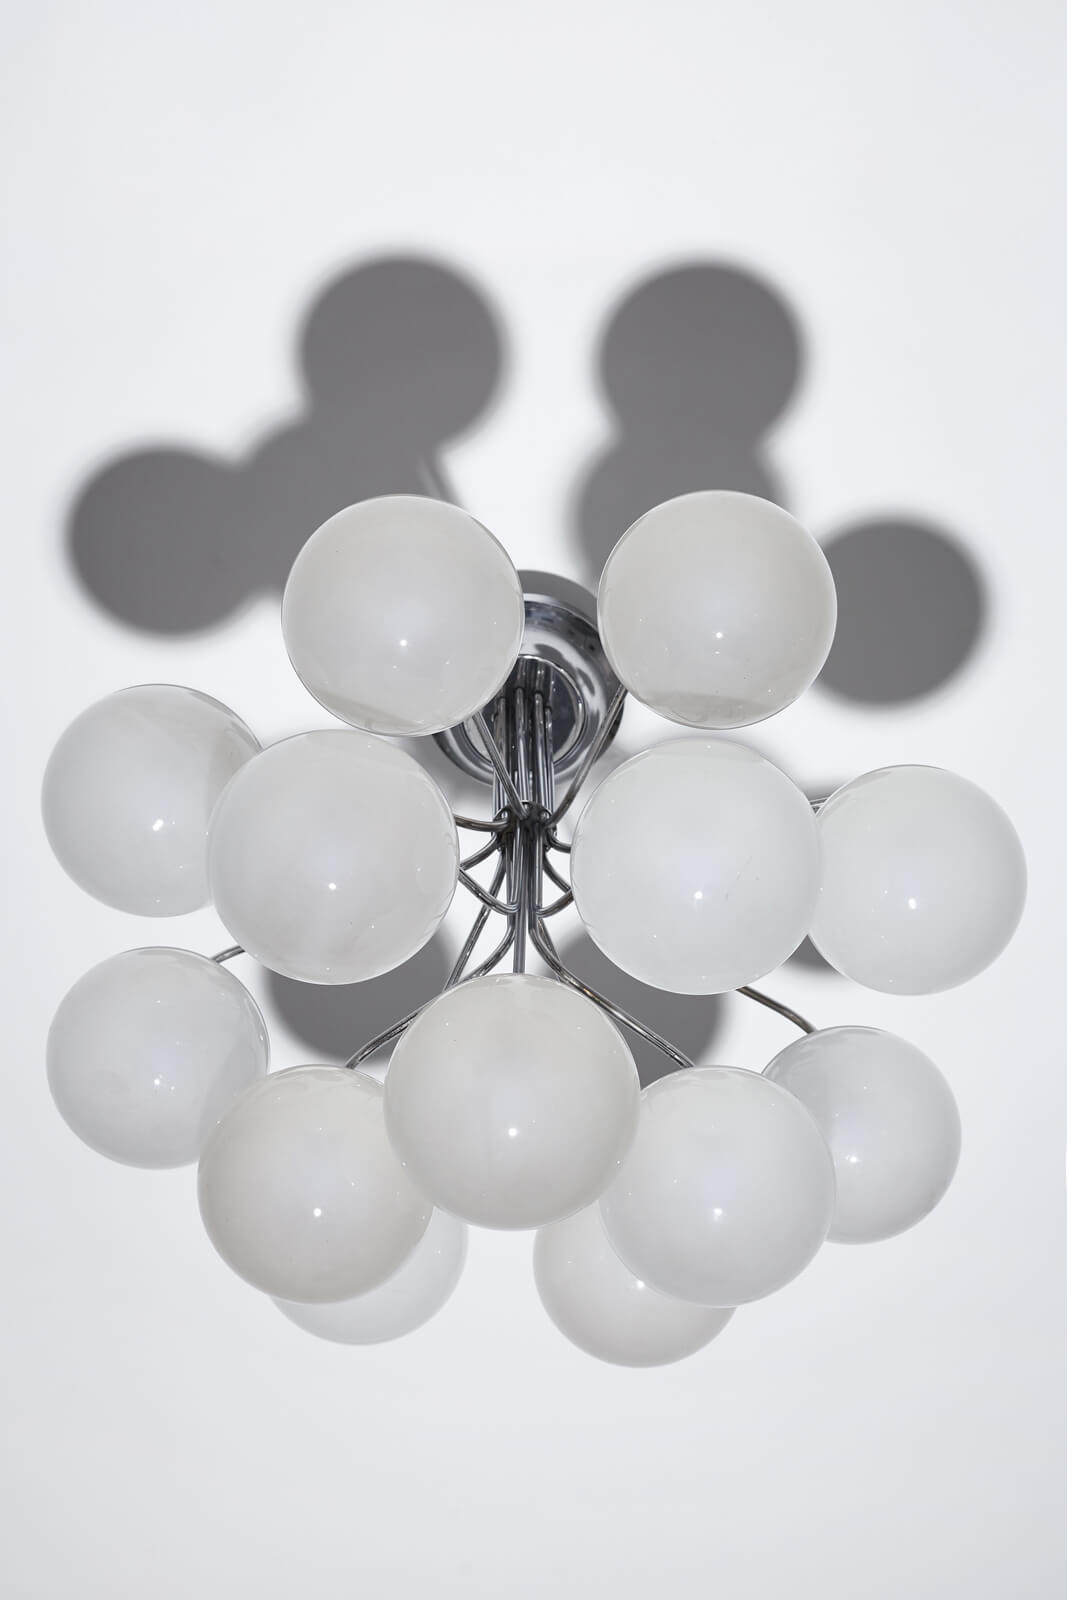 Ceiling lamp by Vico Magistretti for sale